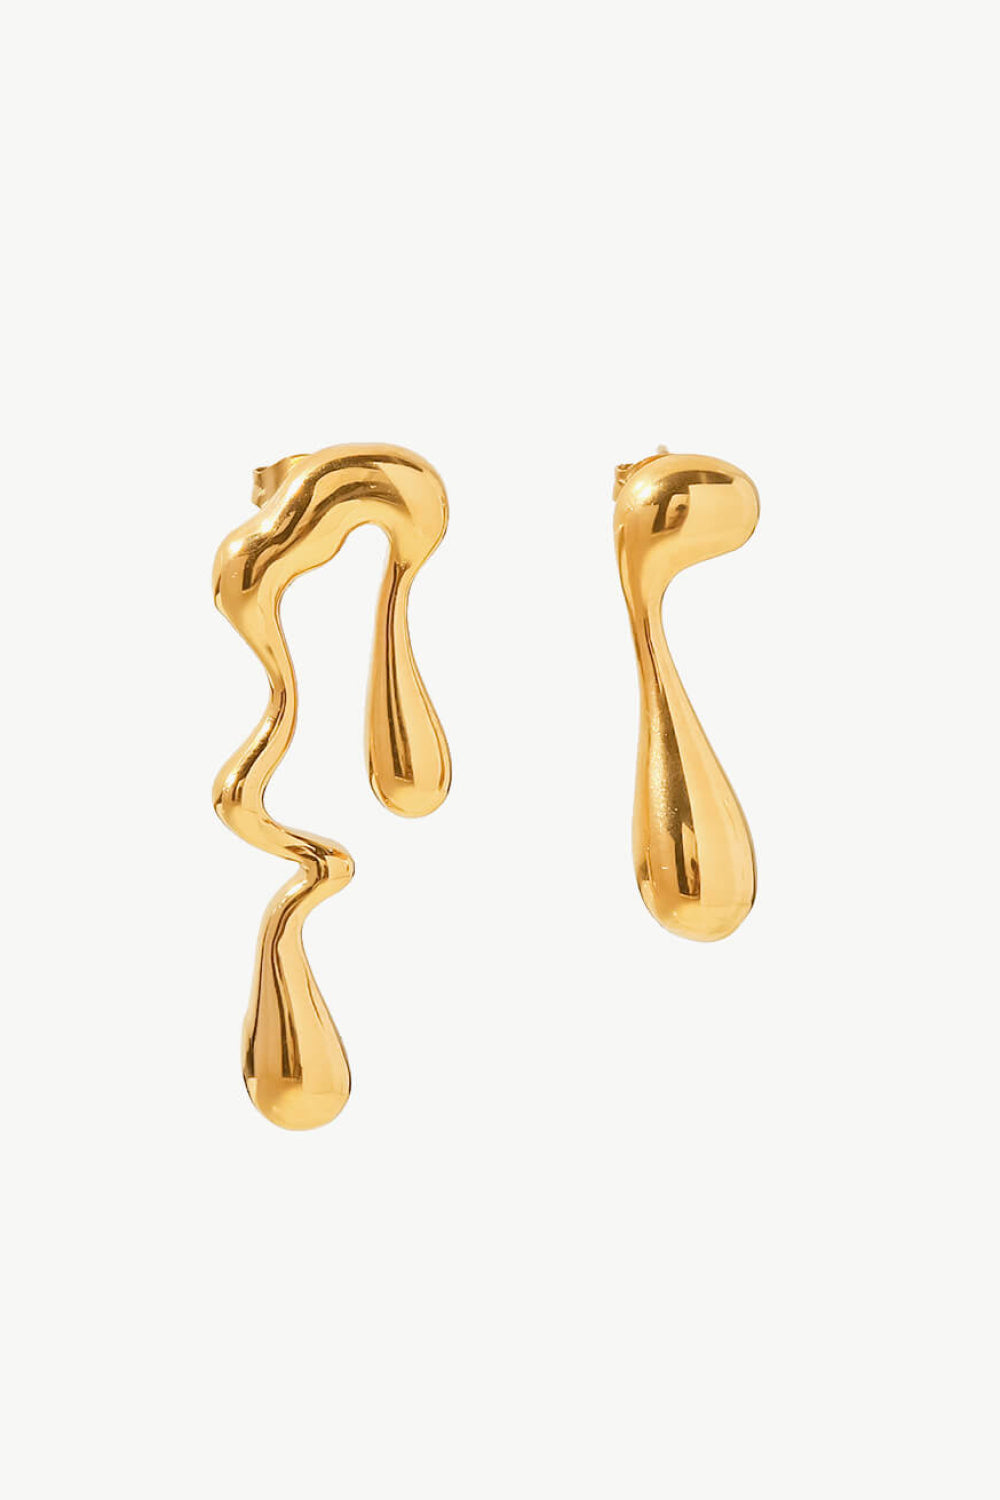 18K Gold Plated Geometric Mismatched Earrings - Earrings - FITGGINS